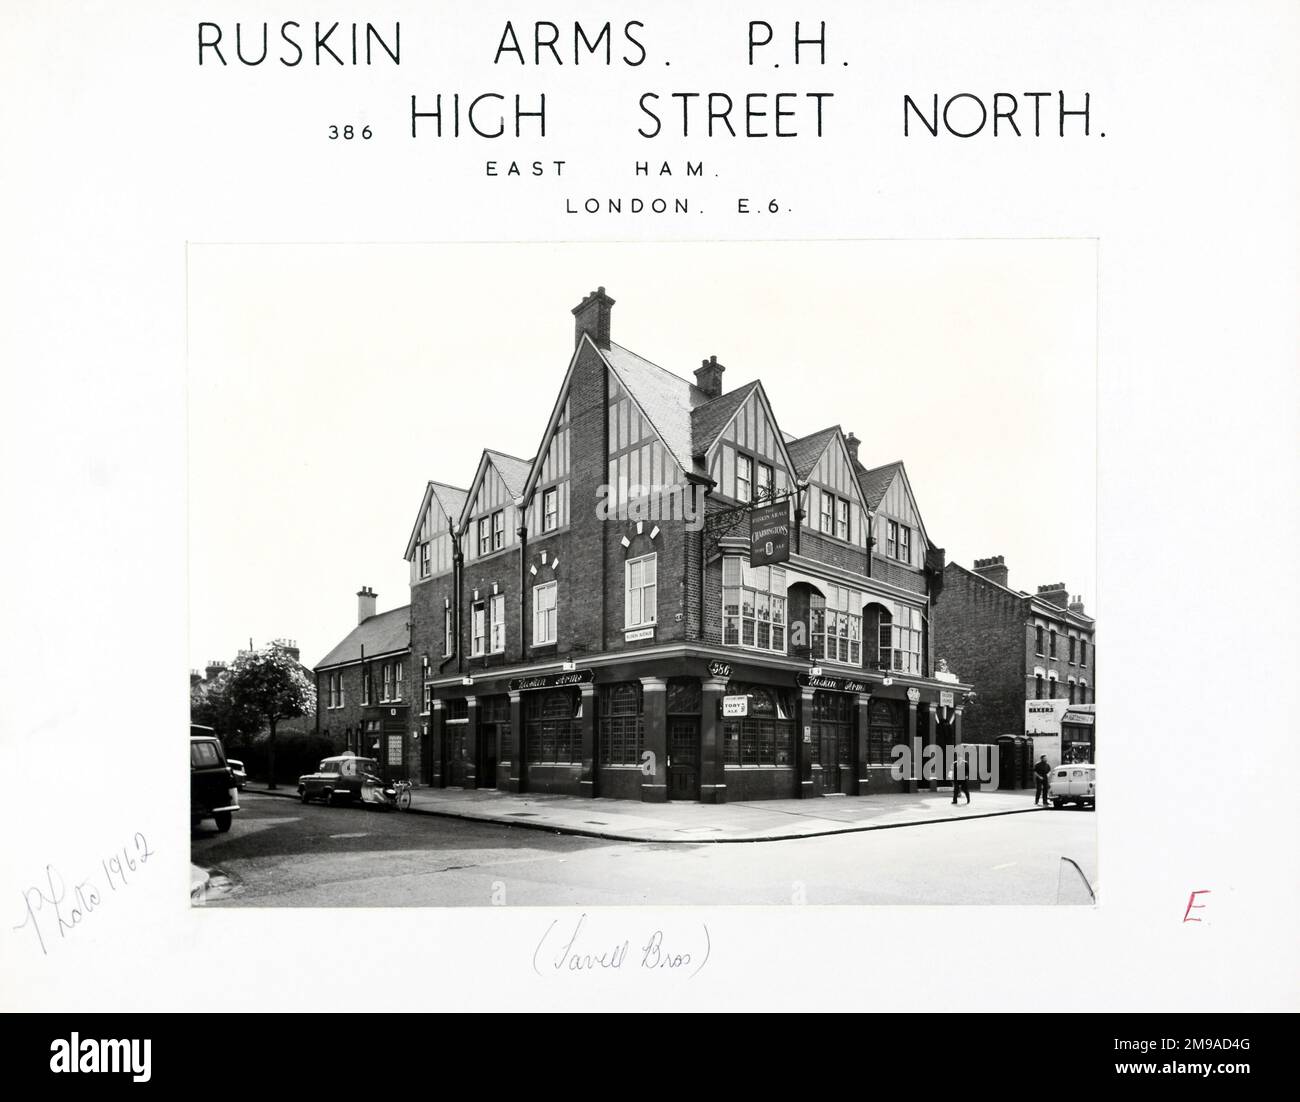 Photograph of Ruskin Arms, East Ham, London. The main side of the print (shown here) depicts: Corner on view of the pub.  The back of the print (available on request) details: Trading Record 1943 . 1961 for the Ruskin Arms, East Ham, London E12 6PH. As of July 2018 . One time a rock music pub to which the Small Faces and Iron Maiden both trace their roots. Reopened August 2013 after substantial building works at rear. Ruskin Hotels Stock Photo